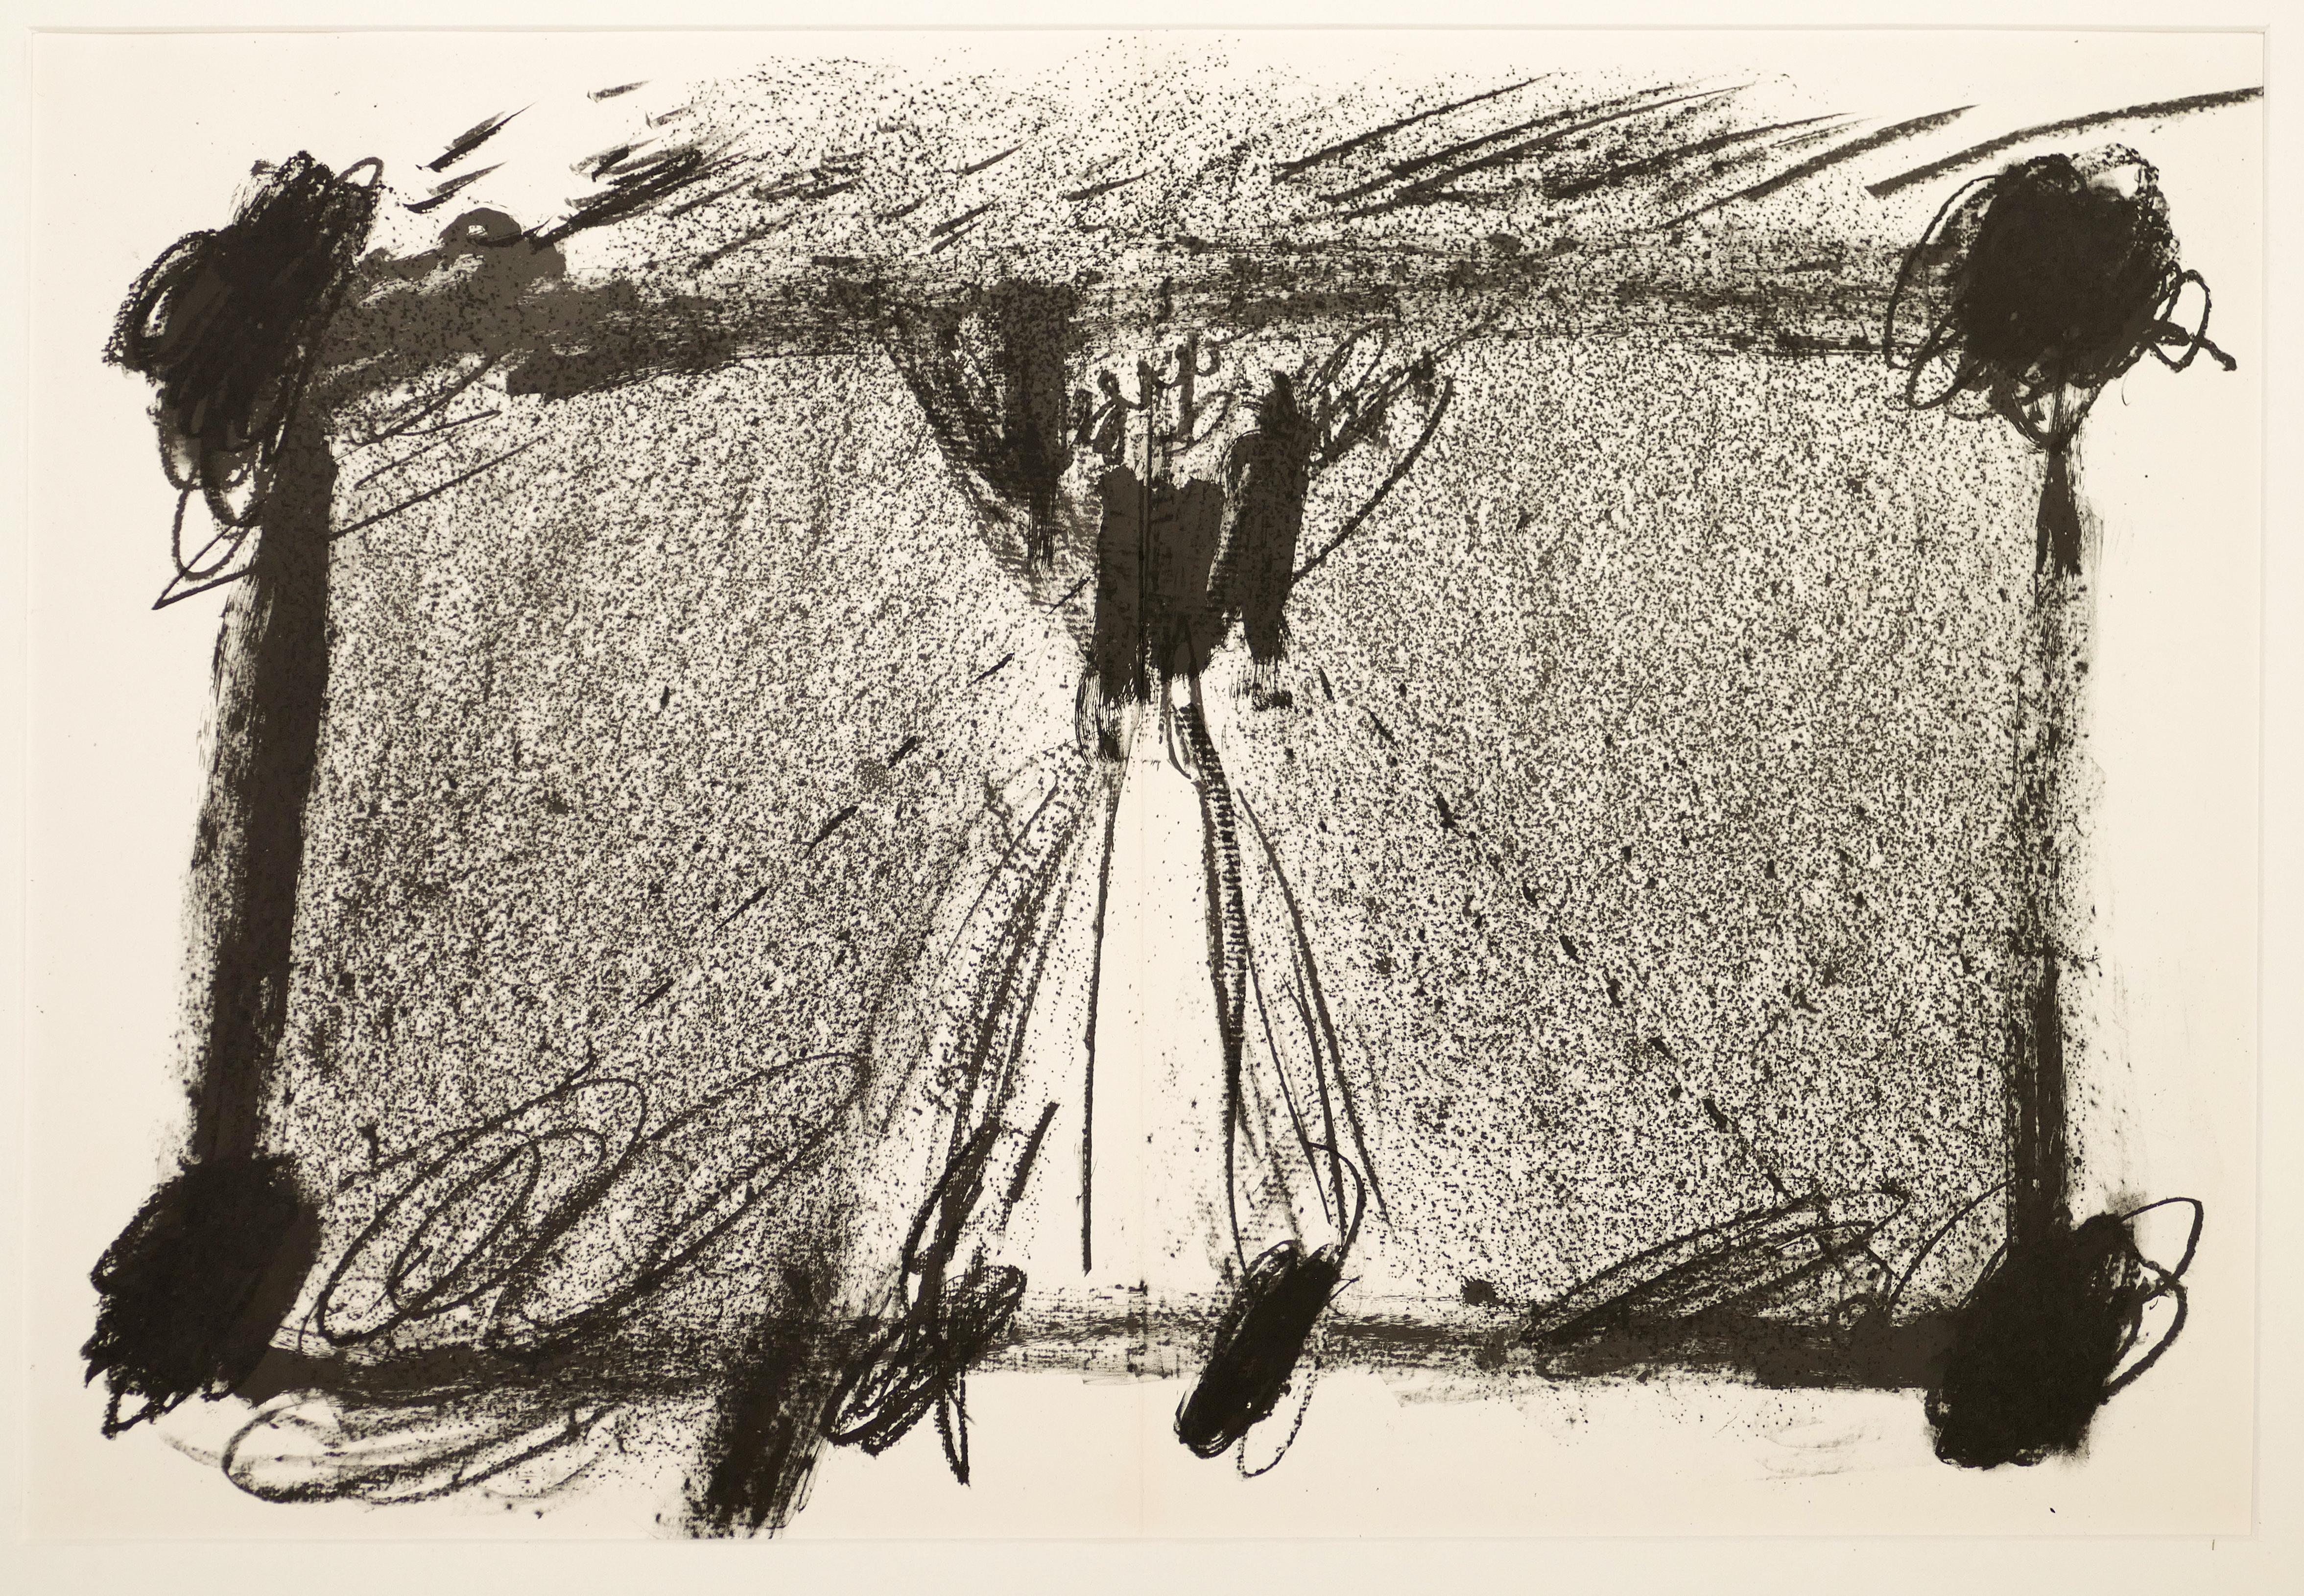 Antoni Tàpies Abstract Print - In Two Blacks - Original Lithograph by Antoni Tapies - 1968